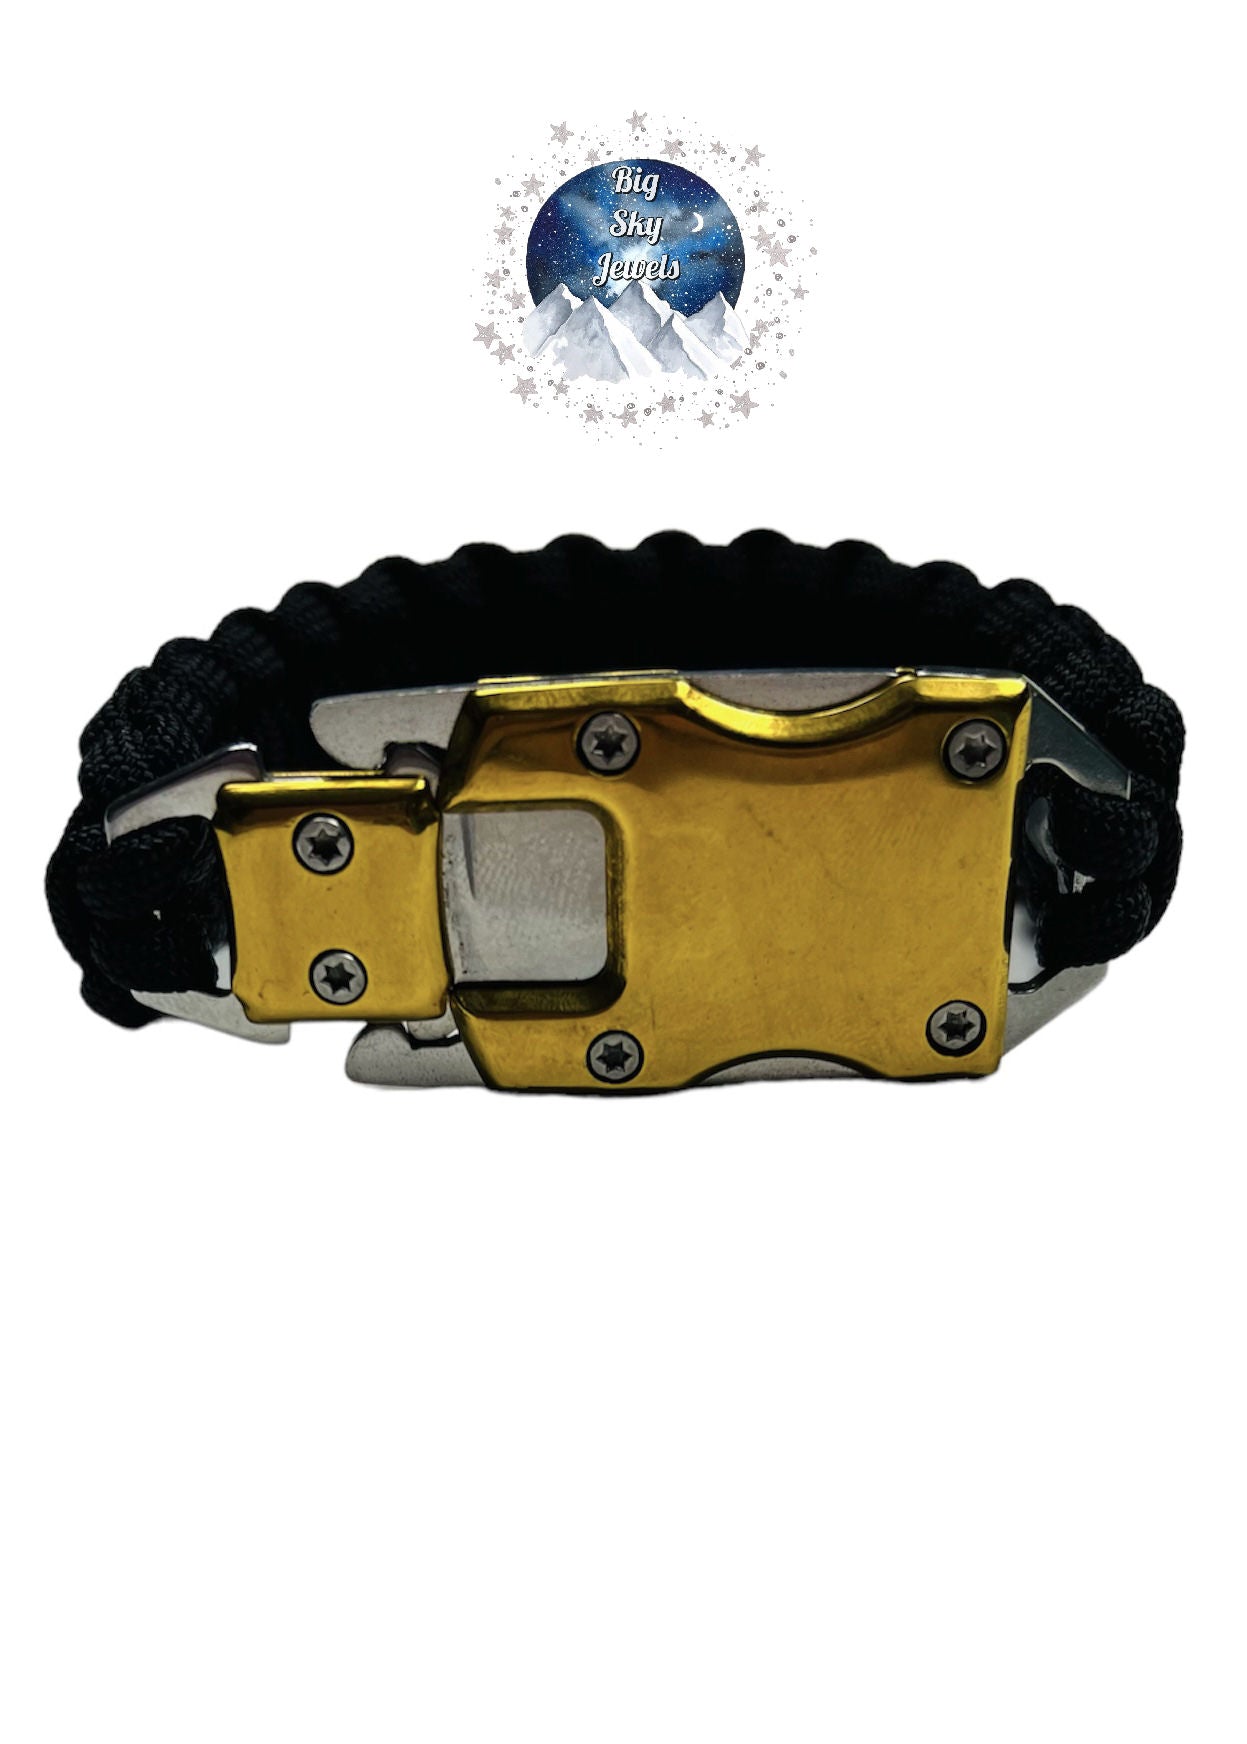 ONE 550 Paracord Survival Knife Bracelet Stainless Steel Gold